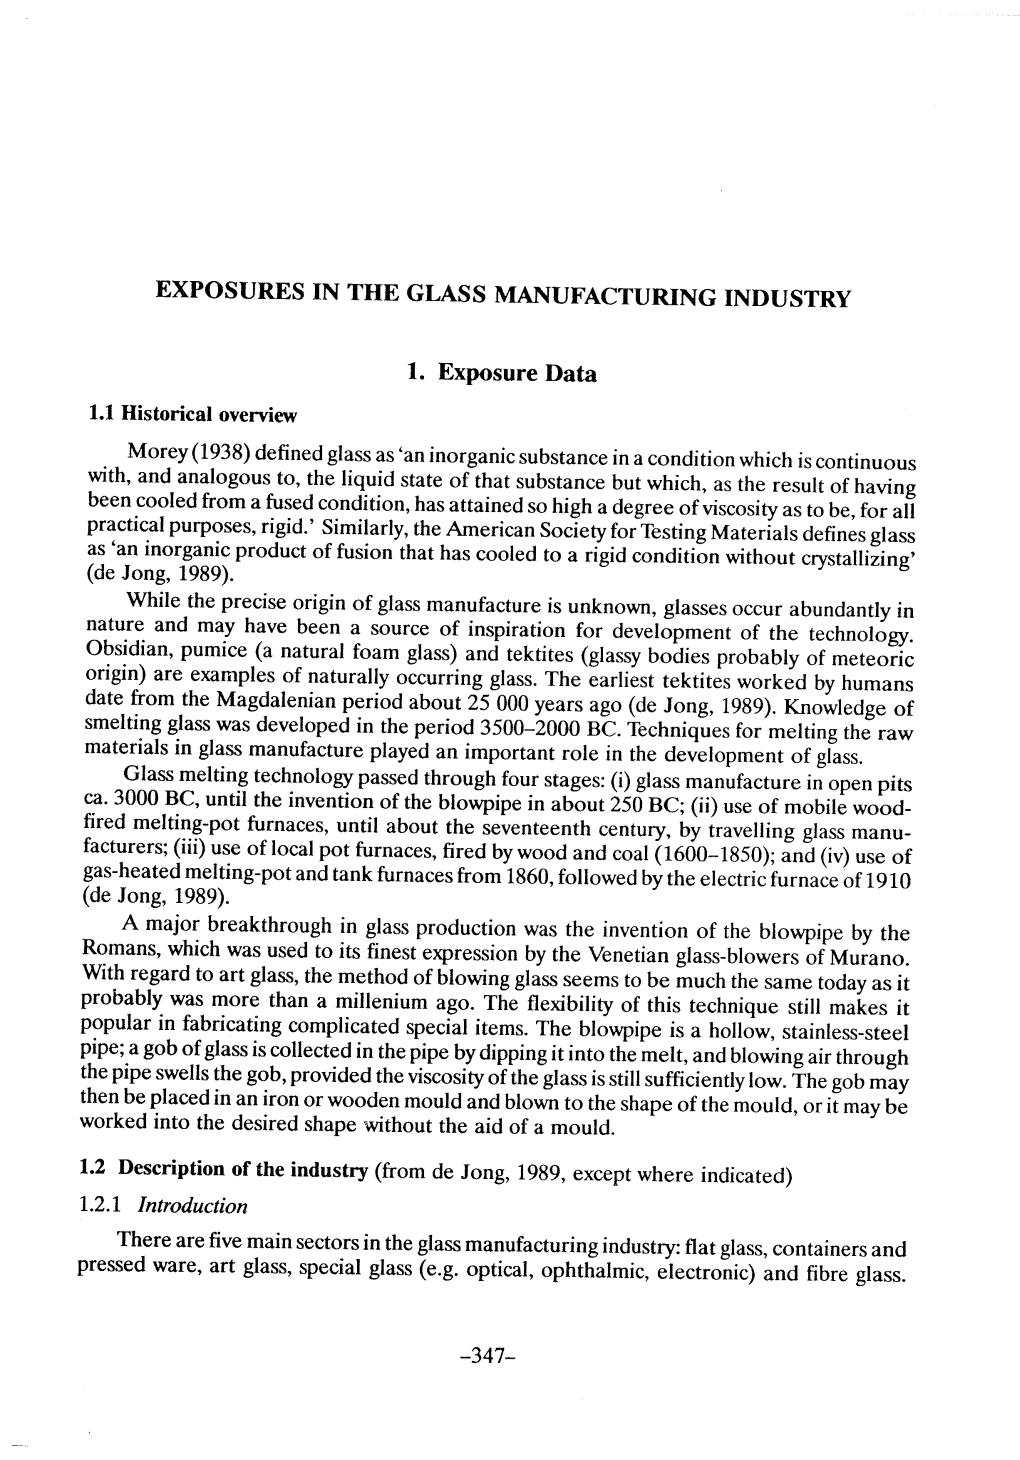 Exposures in the Glass Manufacturing Industry